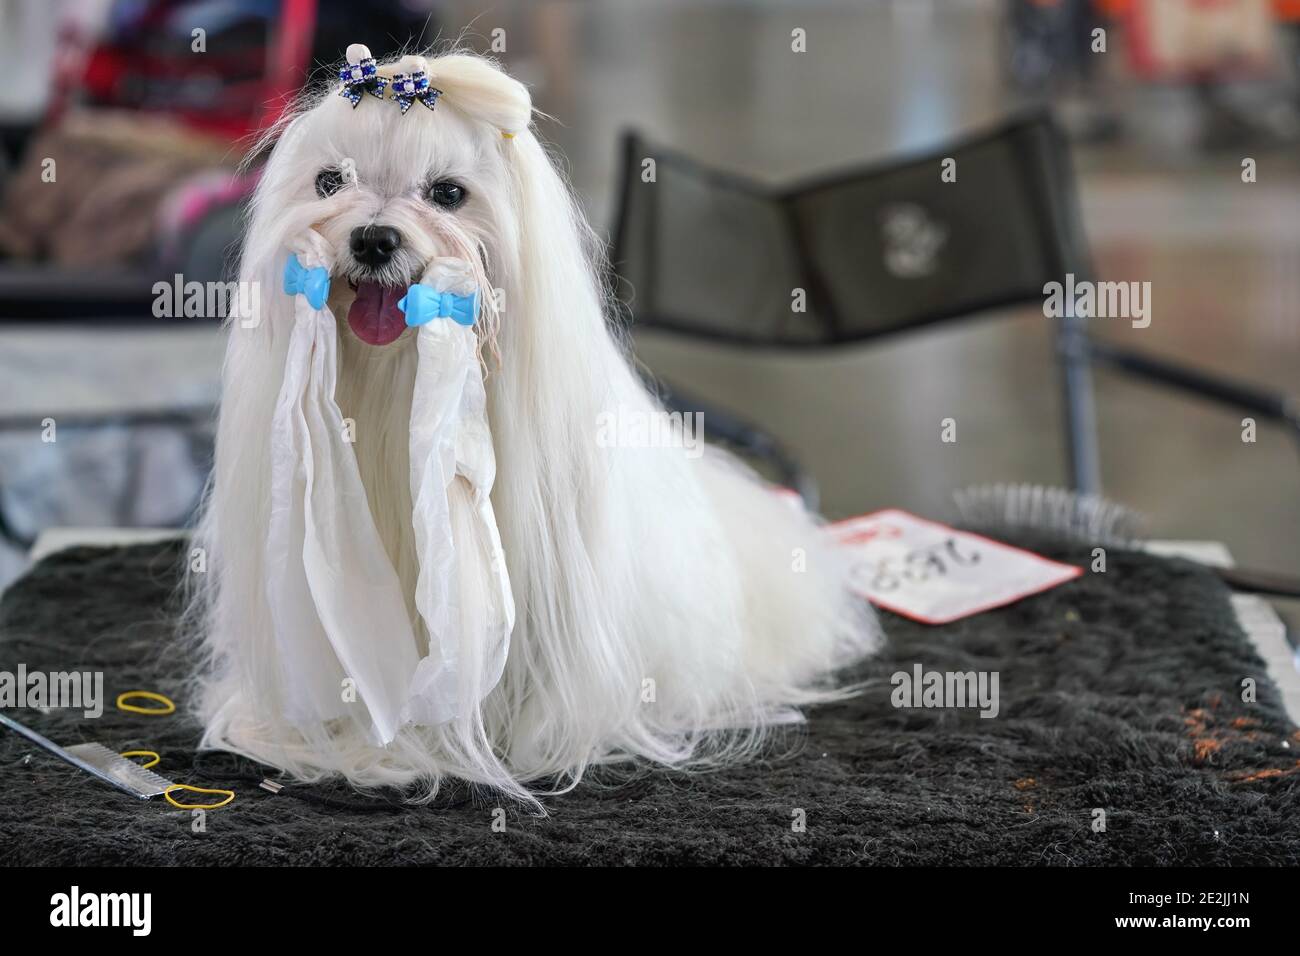 Small White Shih Tzu dog sitting on table, getting groomed before canine contest, glittering bows in her hair, and bands around mouth Stock Photo